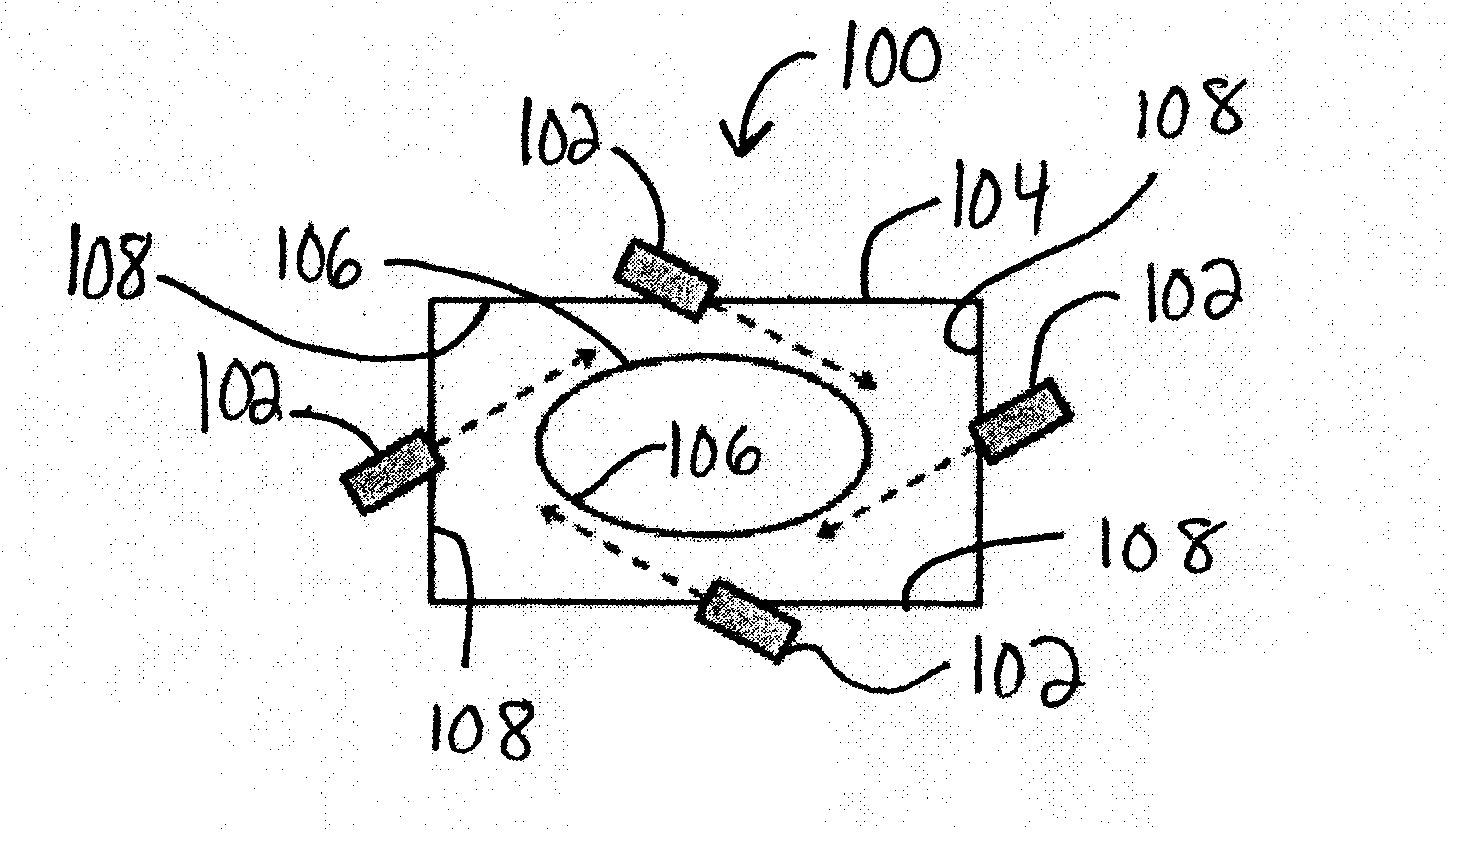 Oxy-Fuel Furnace and Method of Heating Material in an Oxy-Fuel Furnace